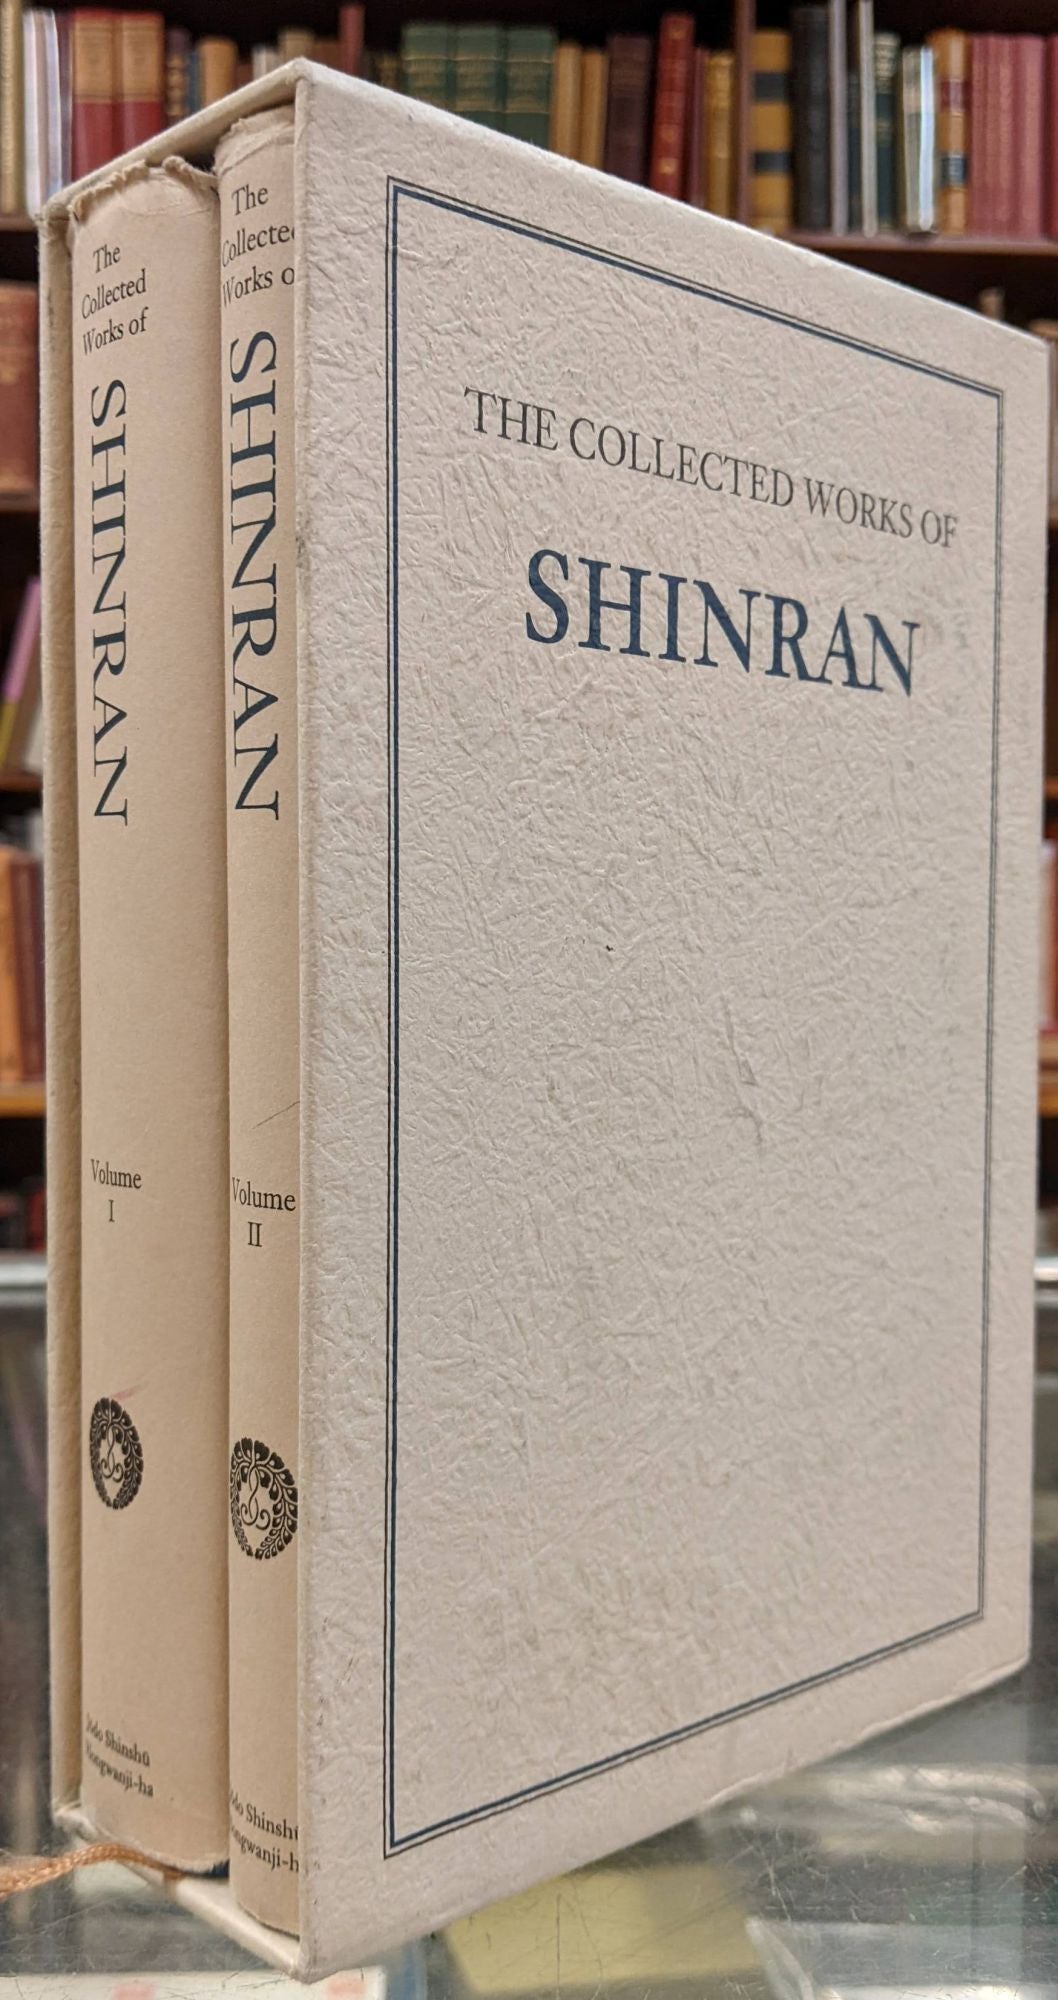 The Collected Works of Shinran, 2 vol by Shinran on Moe's Books